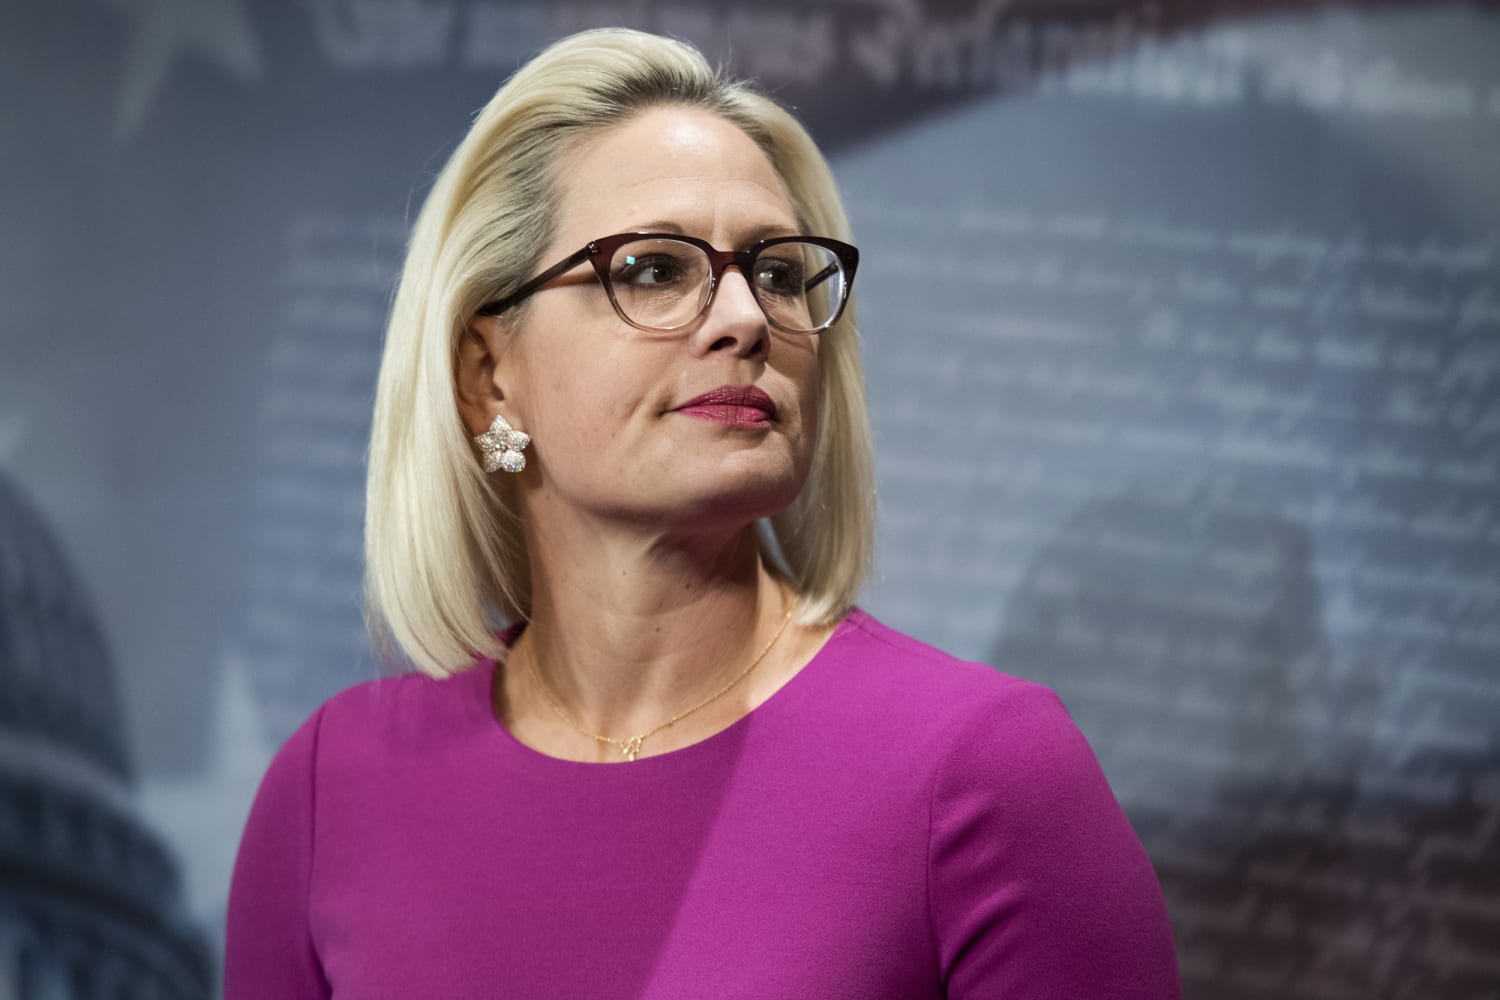 What drives Sinema? A different view of politics